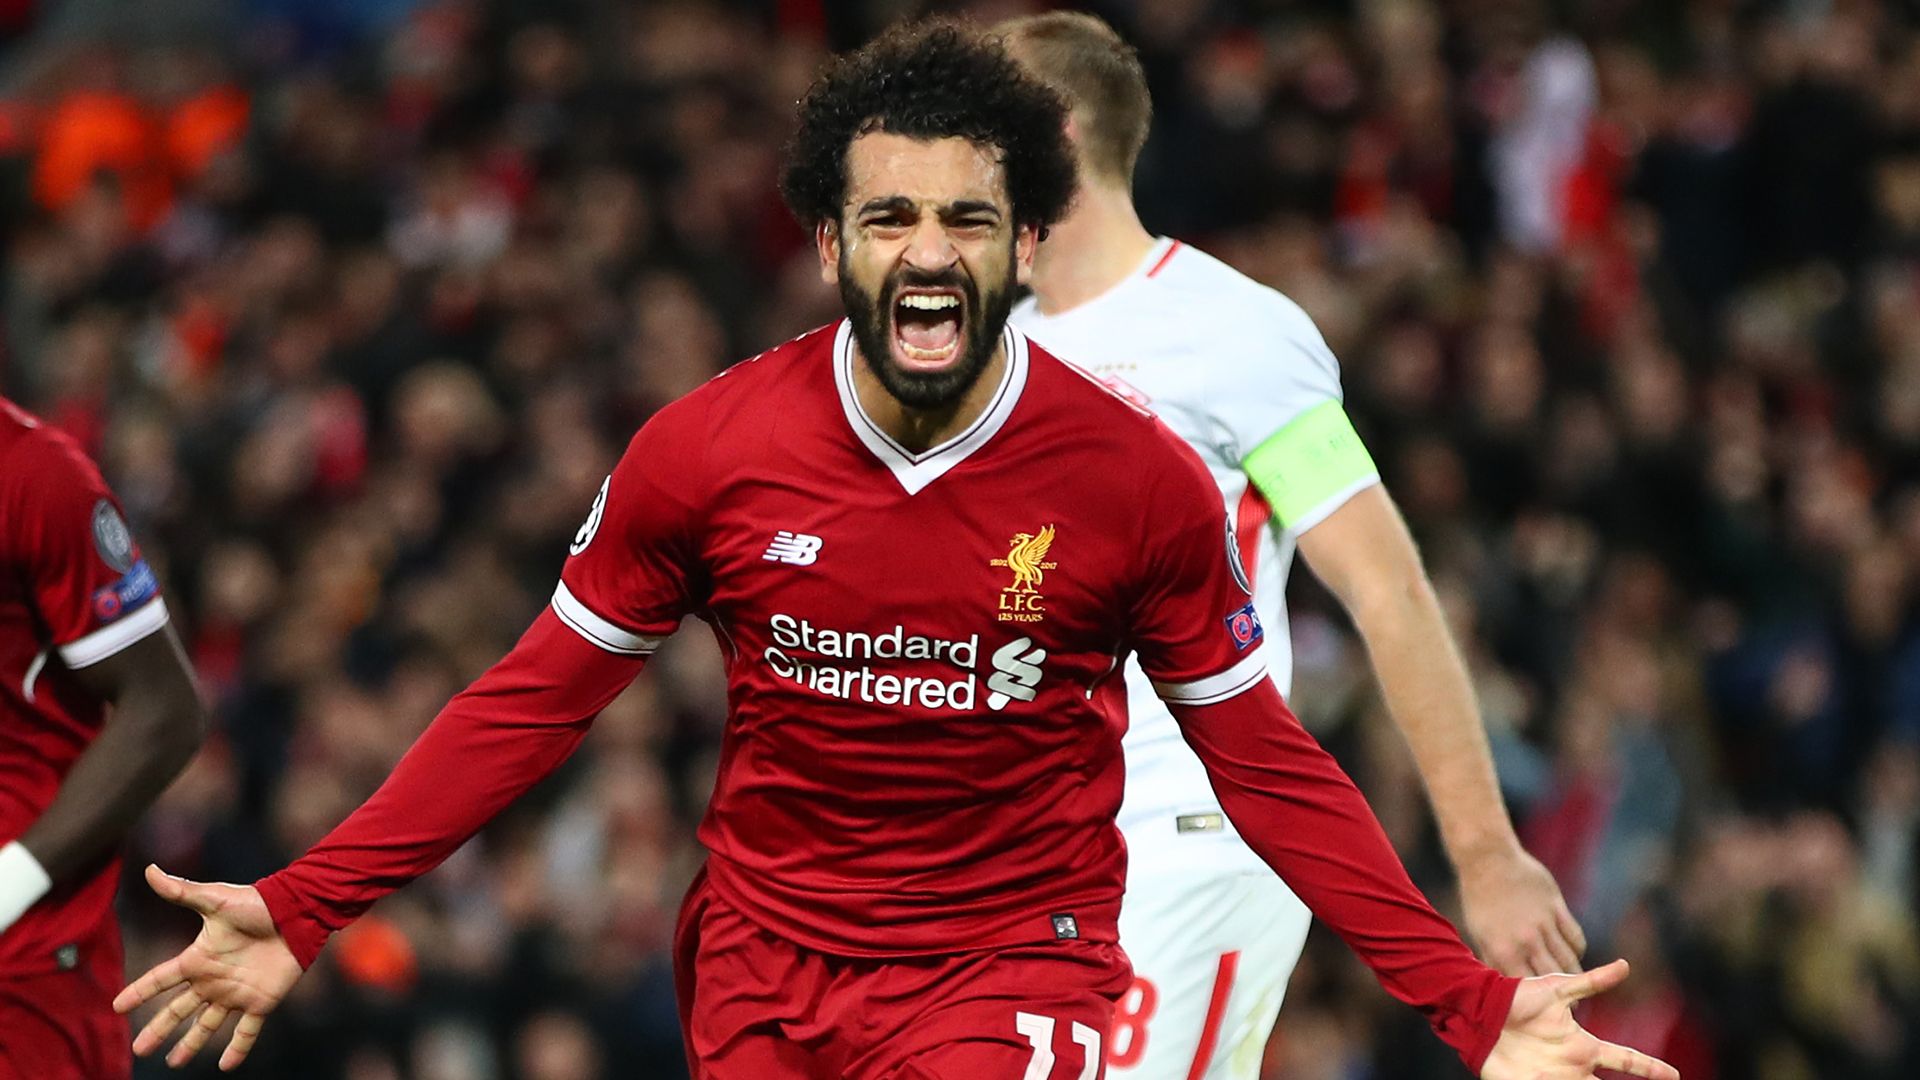 Mohamed-Salah-My-best-Liverpool-goals-and-2018-silverware-ambitions.jpg